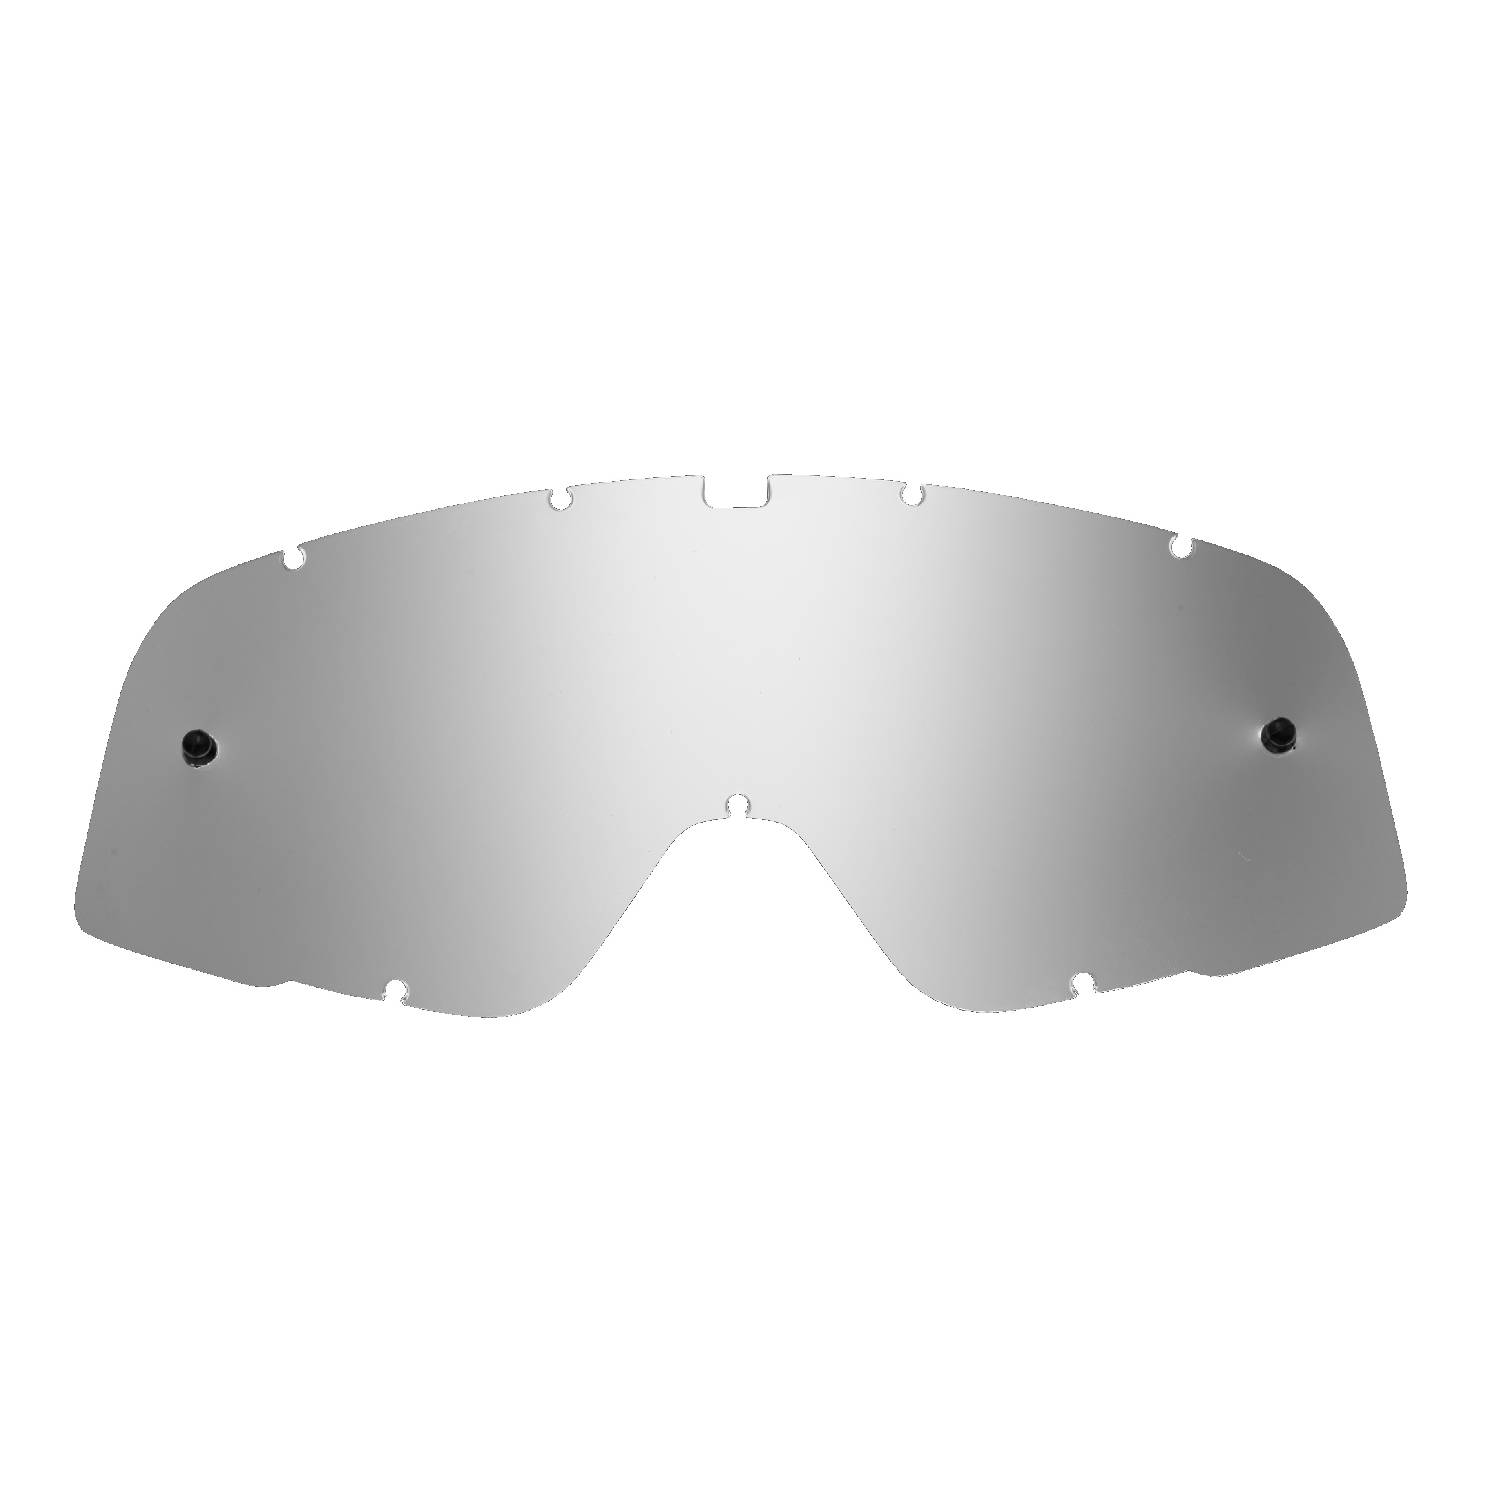 silver-toned mirrored replacement lenses for goggles compatible for 100% Barstow goggle